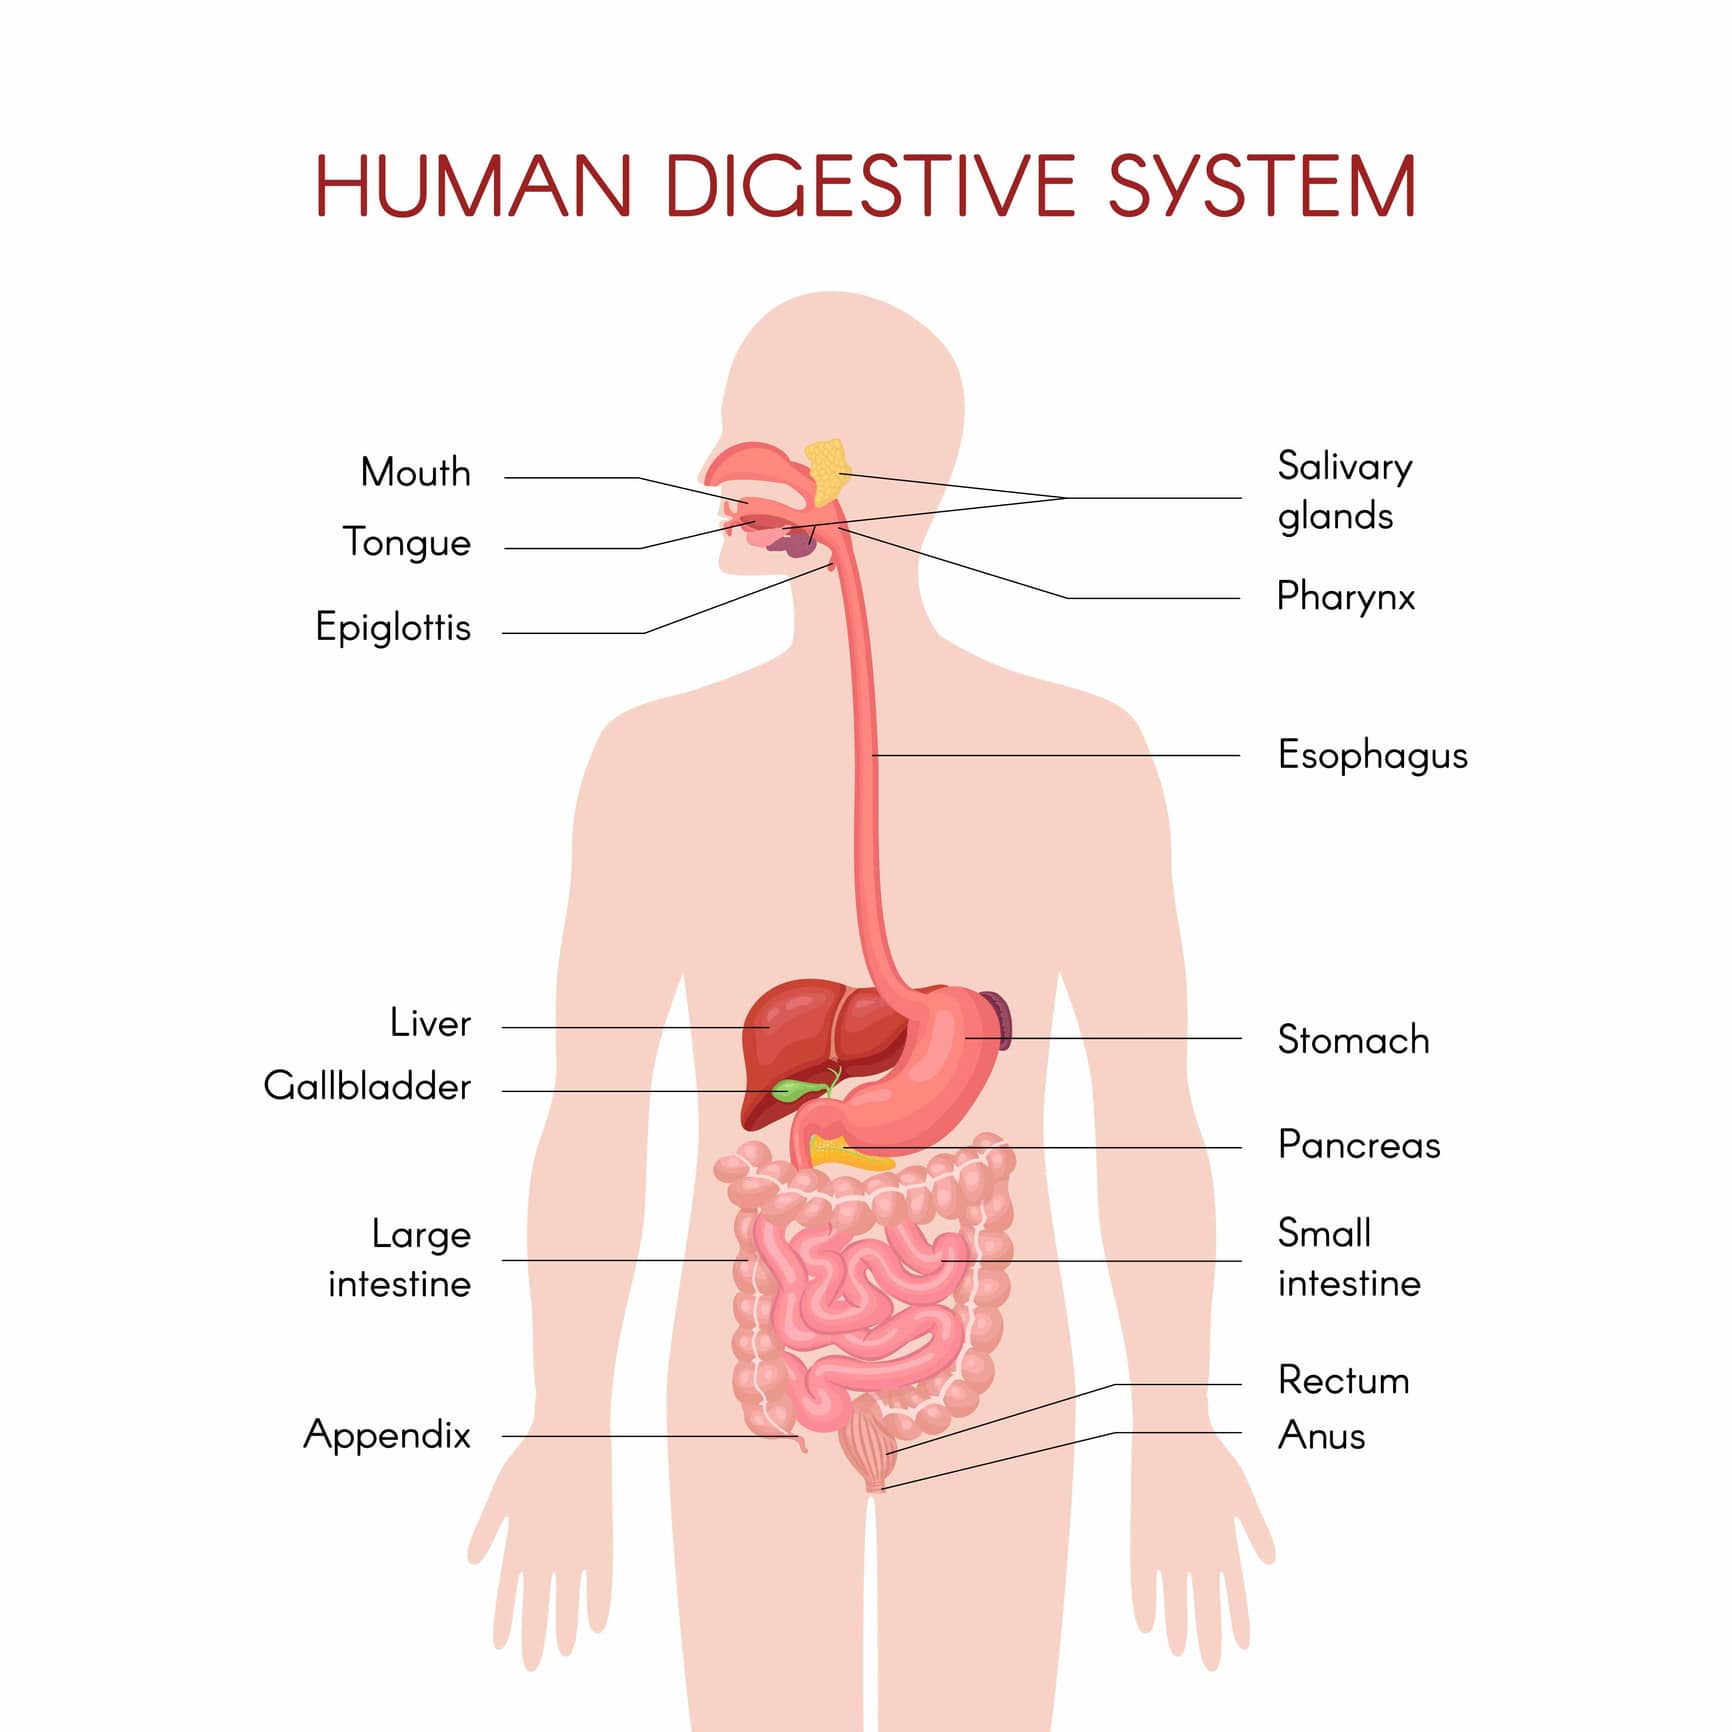 Human digestive system graphic